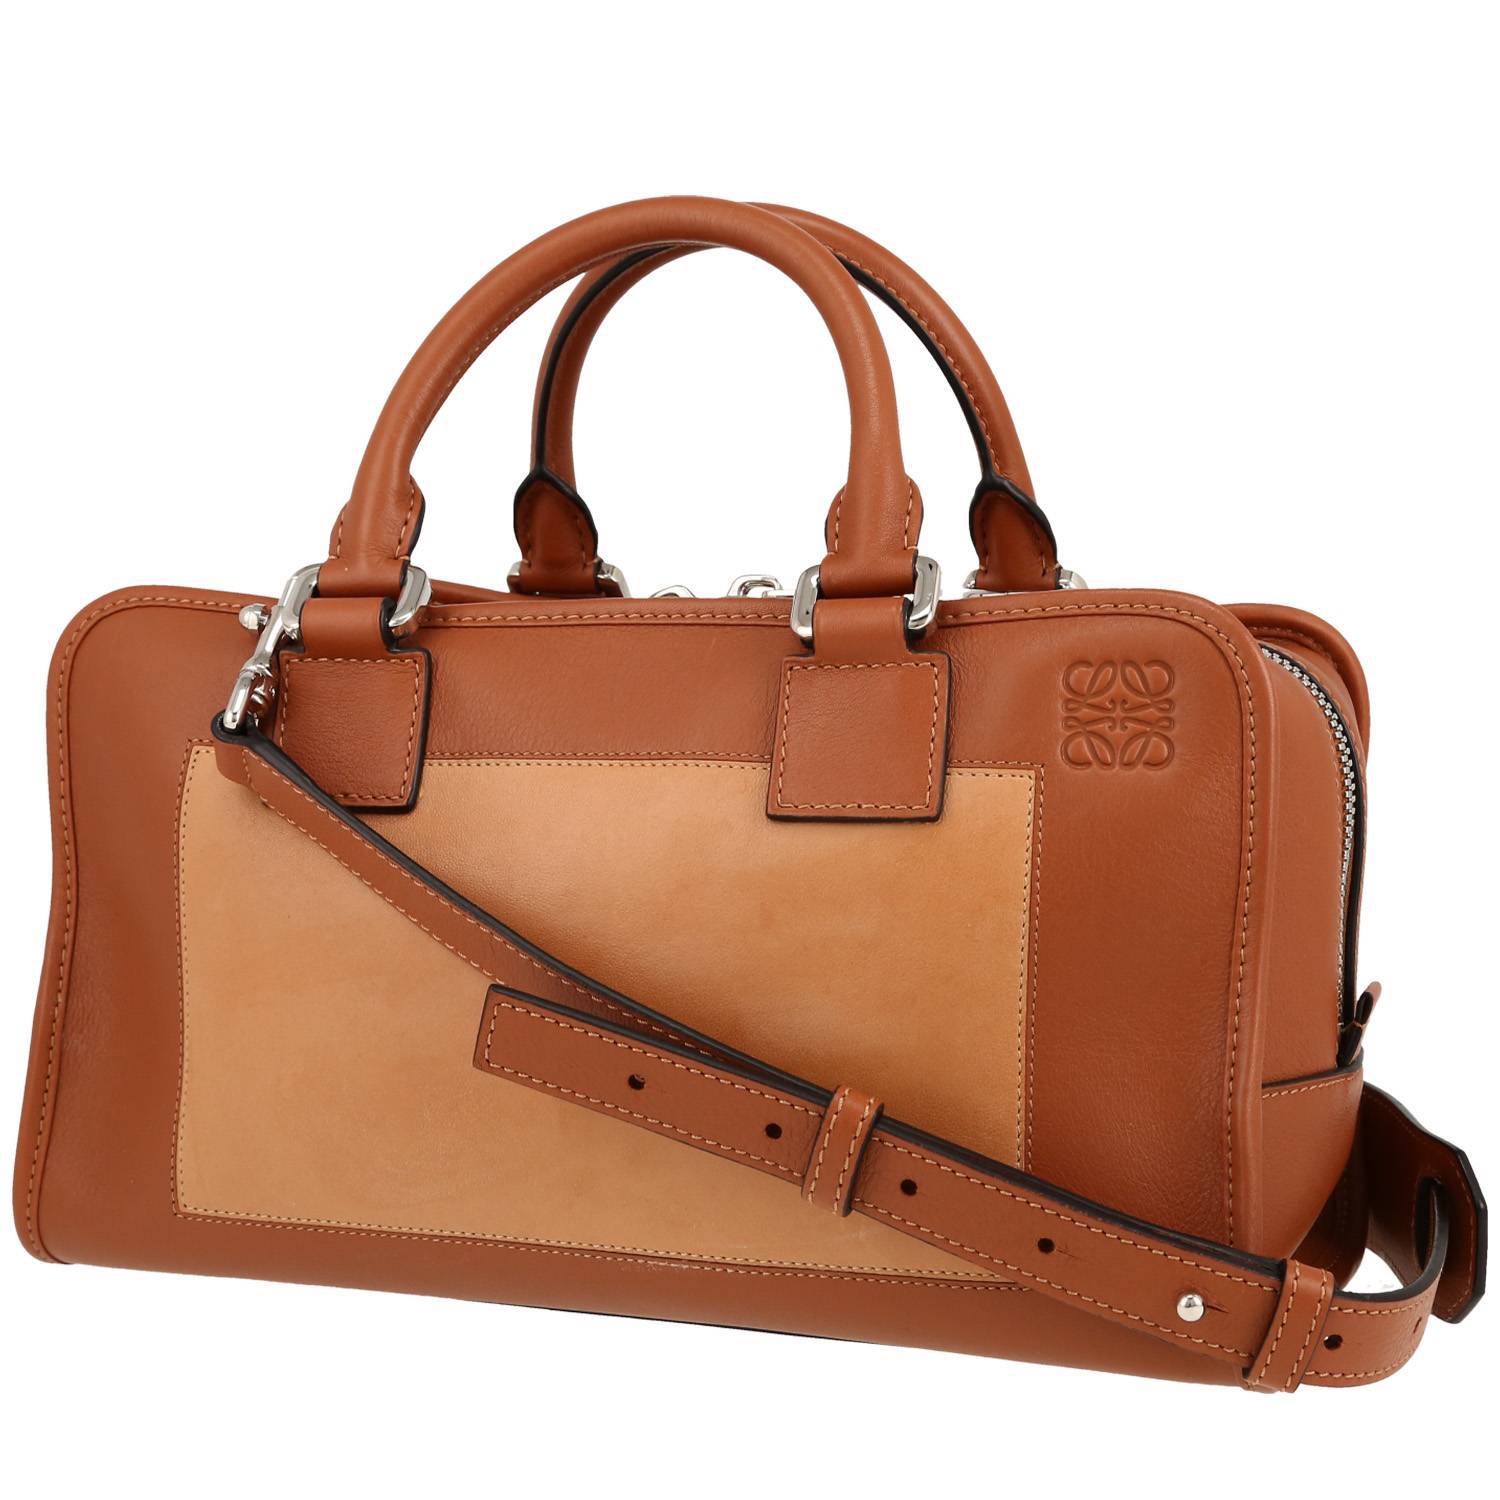 Amazona Handbag In Leather And Brown Suede